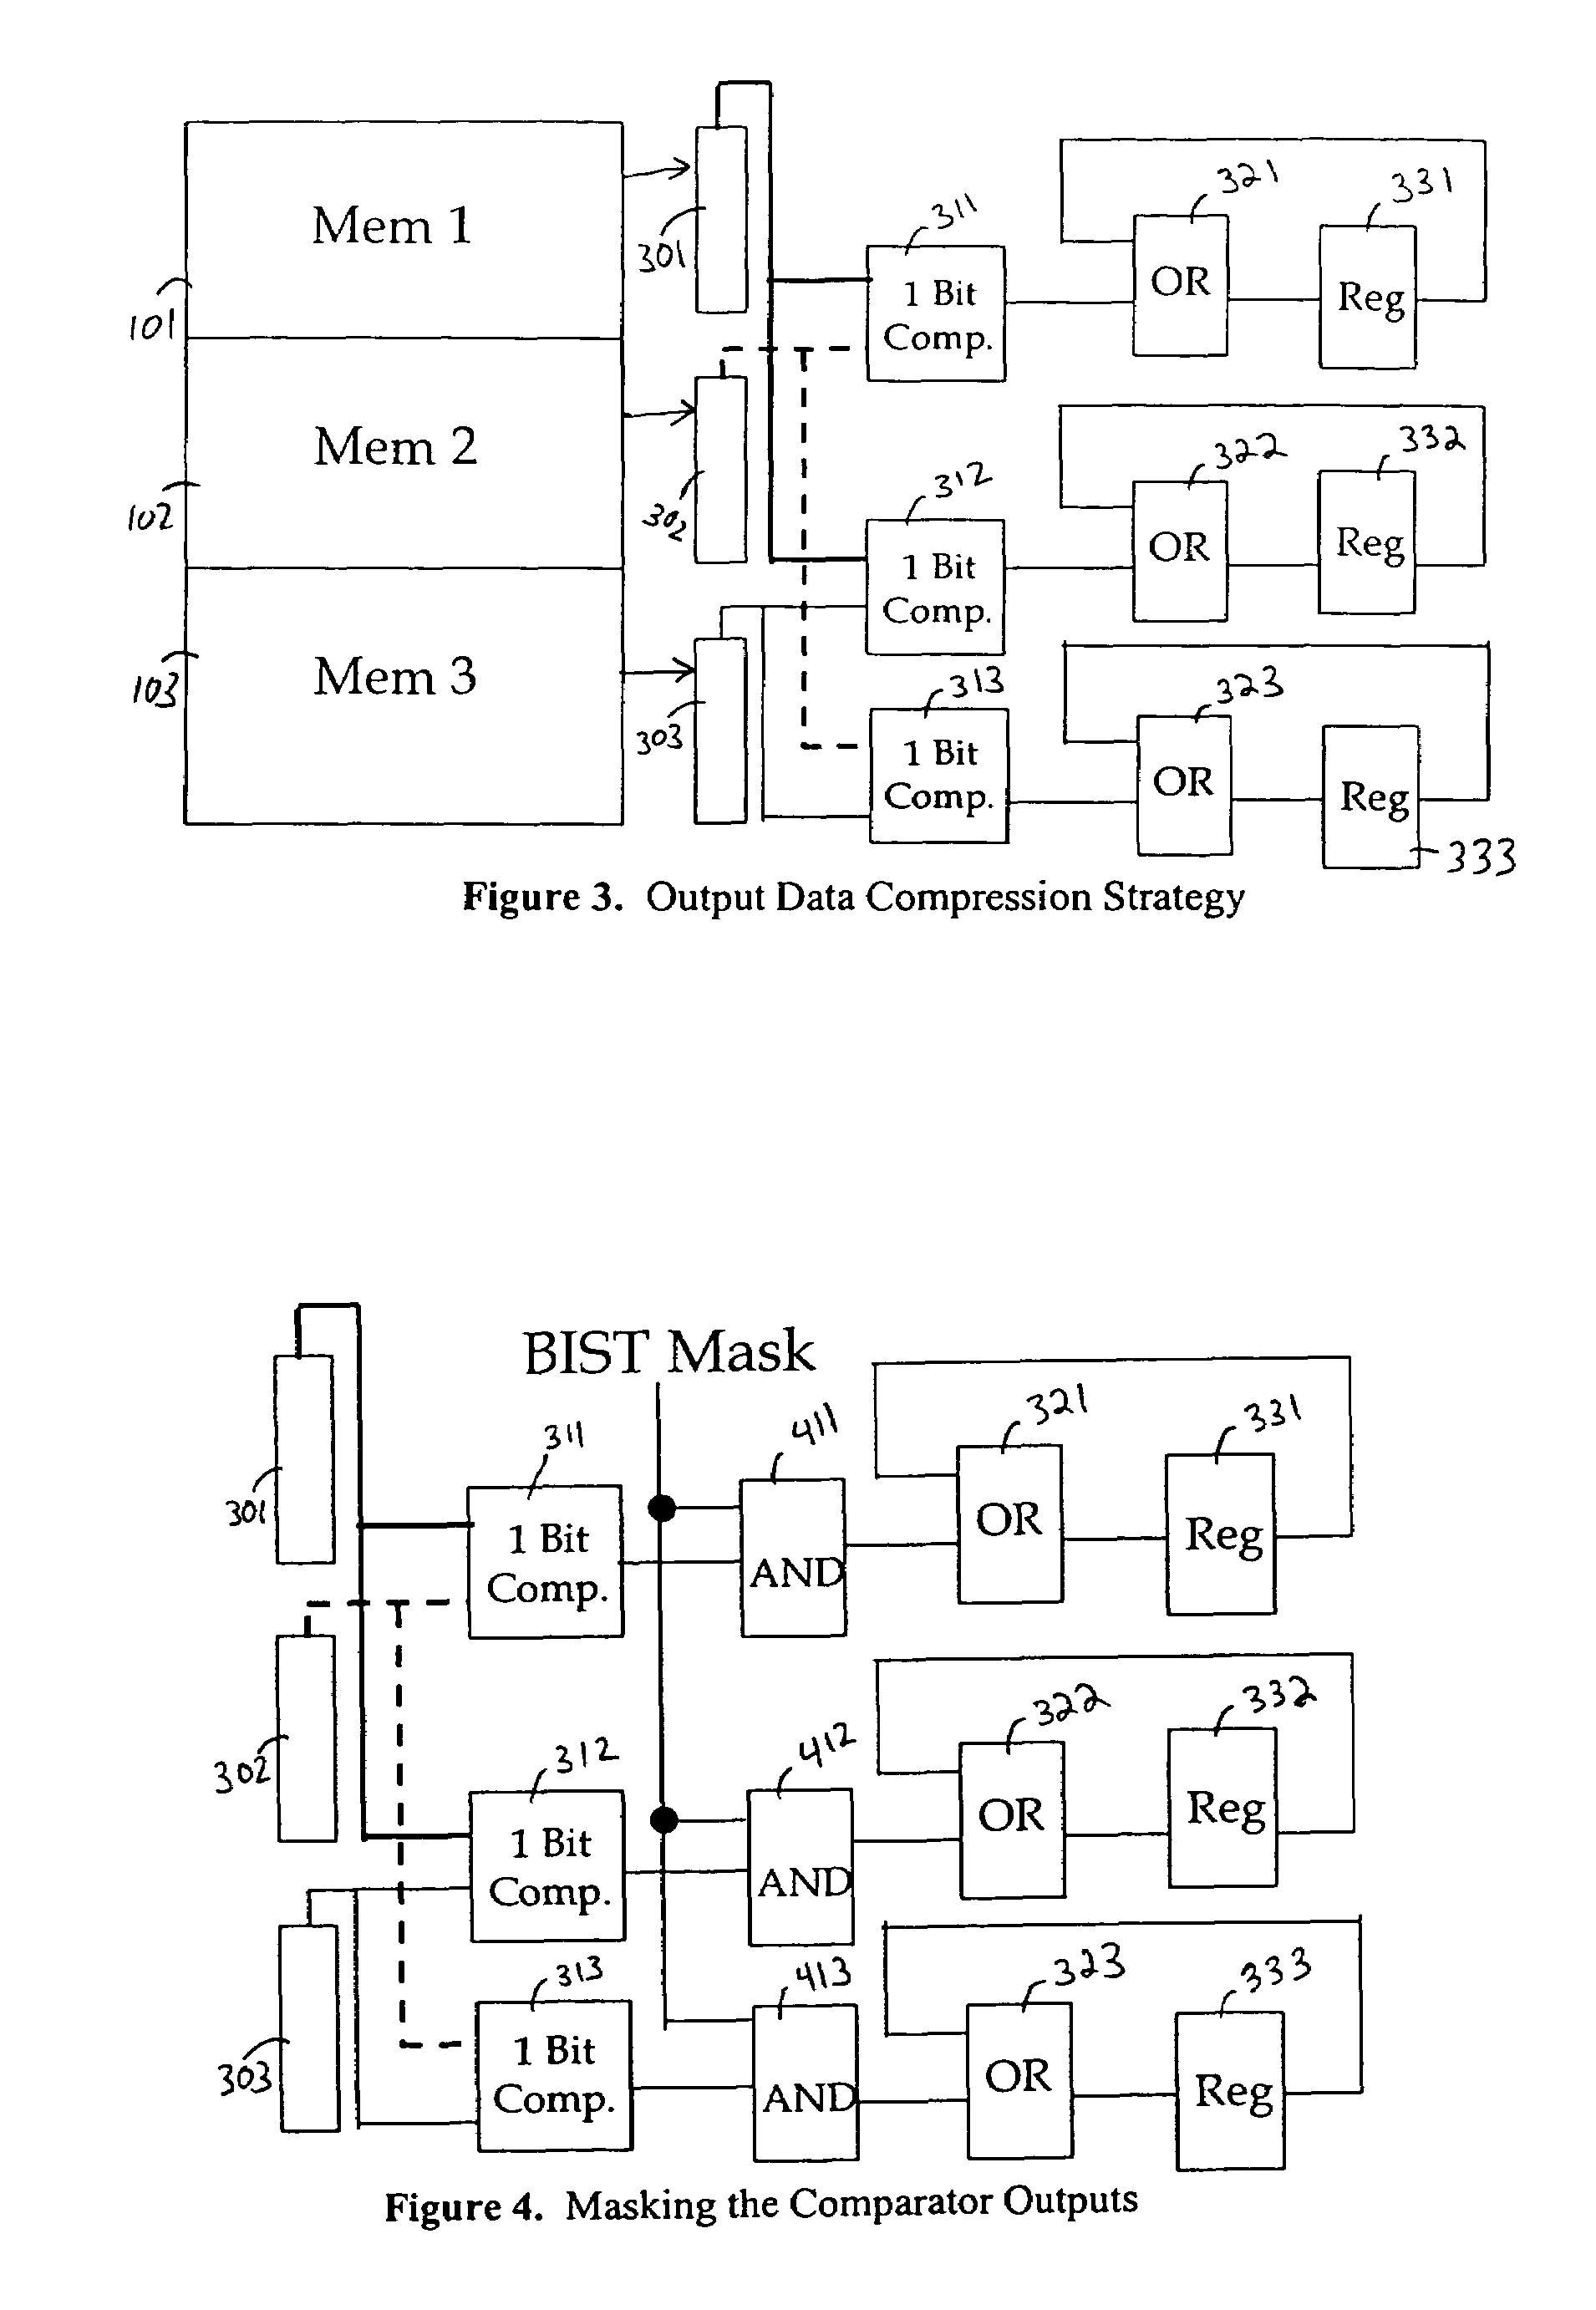 Method and apparatus for routing efficient built-in self test for on-chip circuit blocks